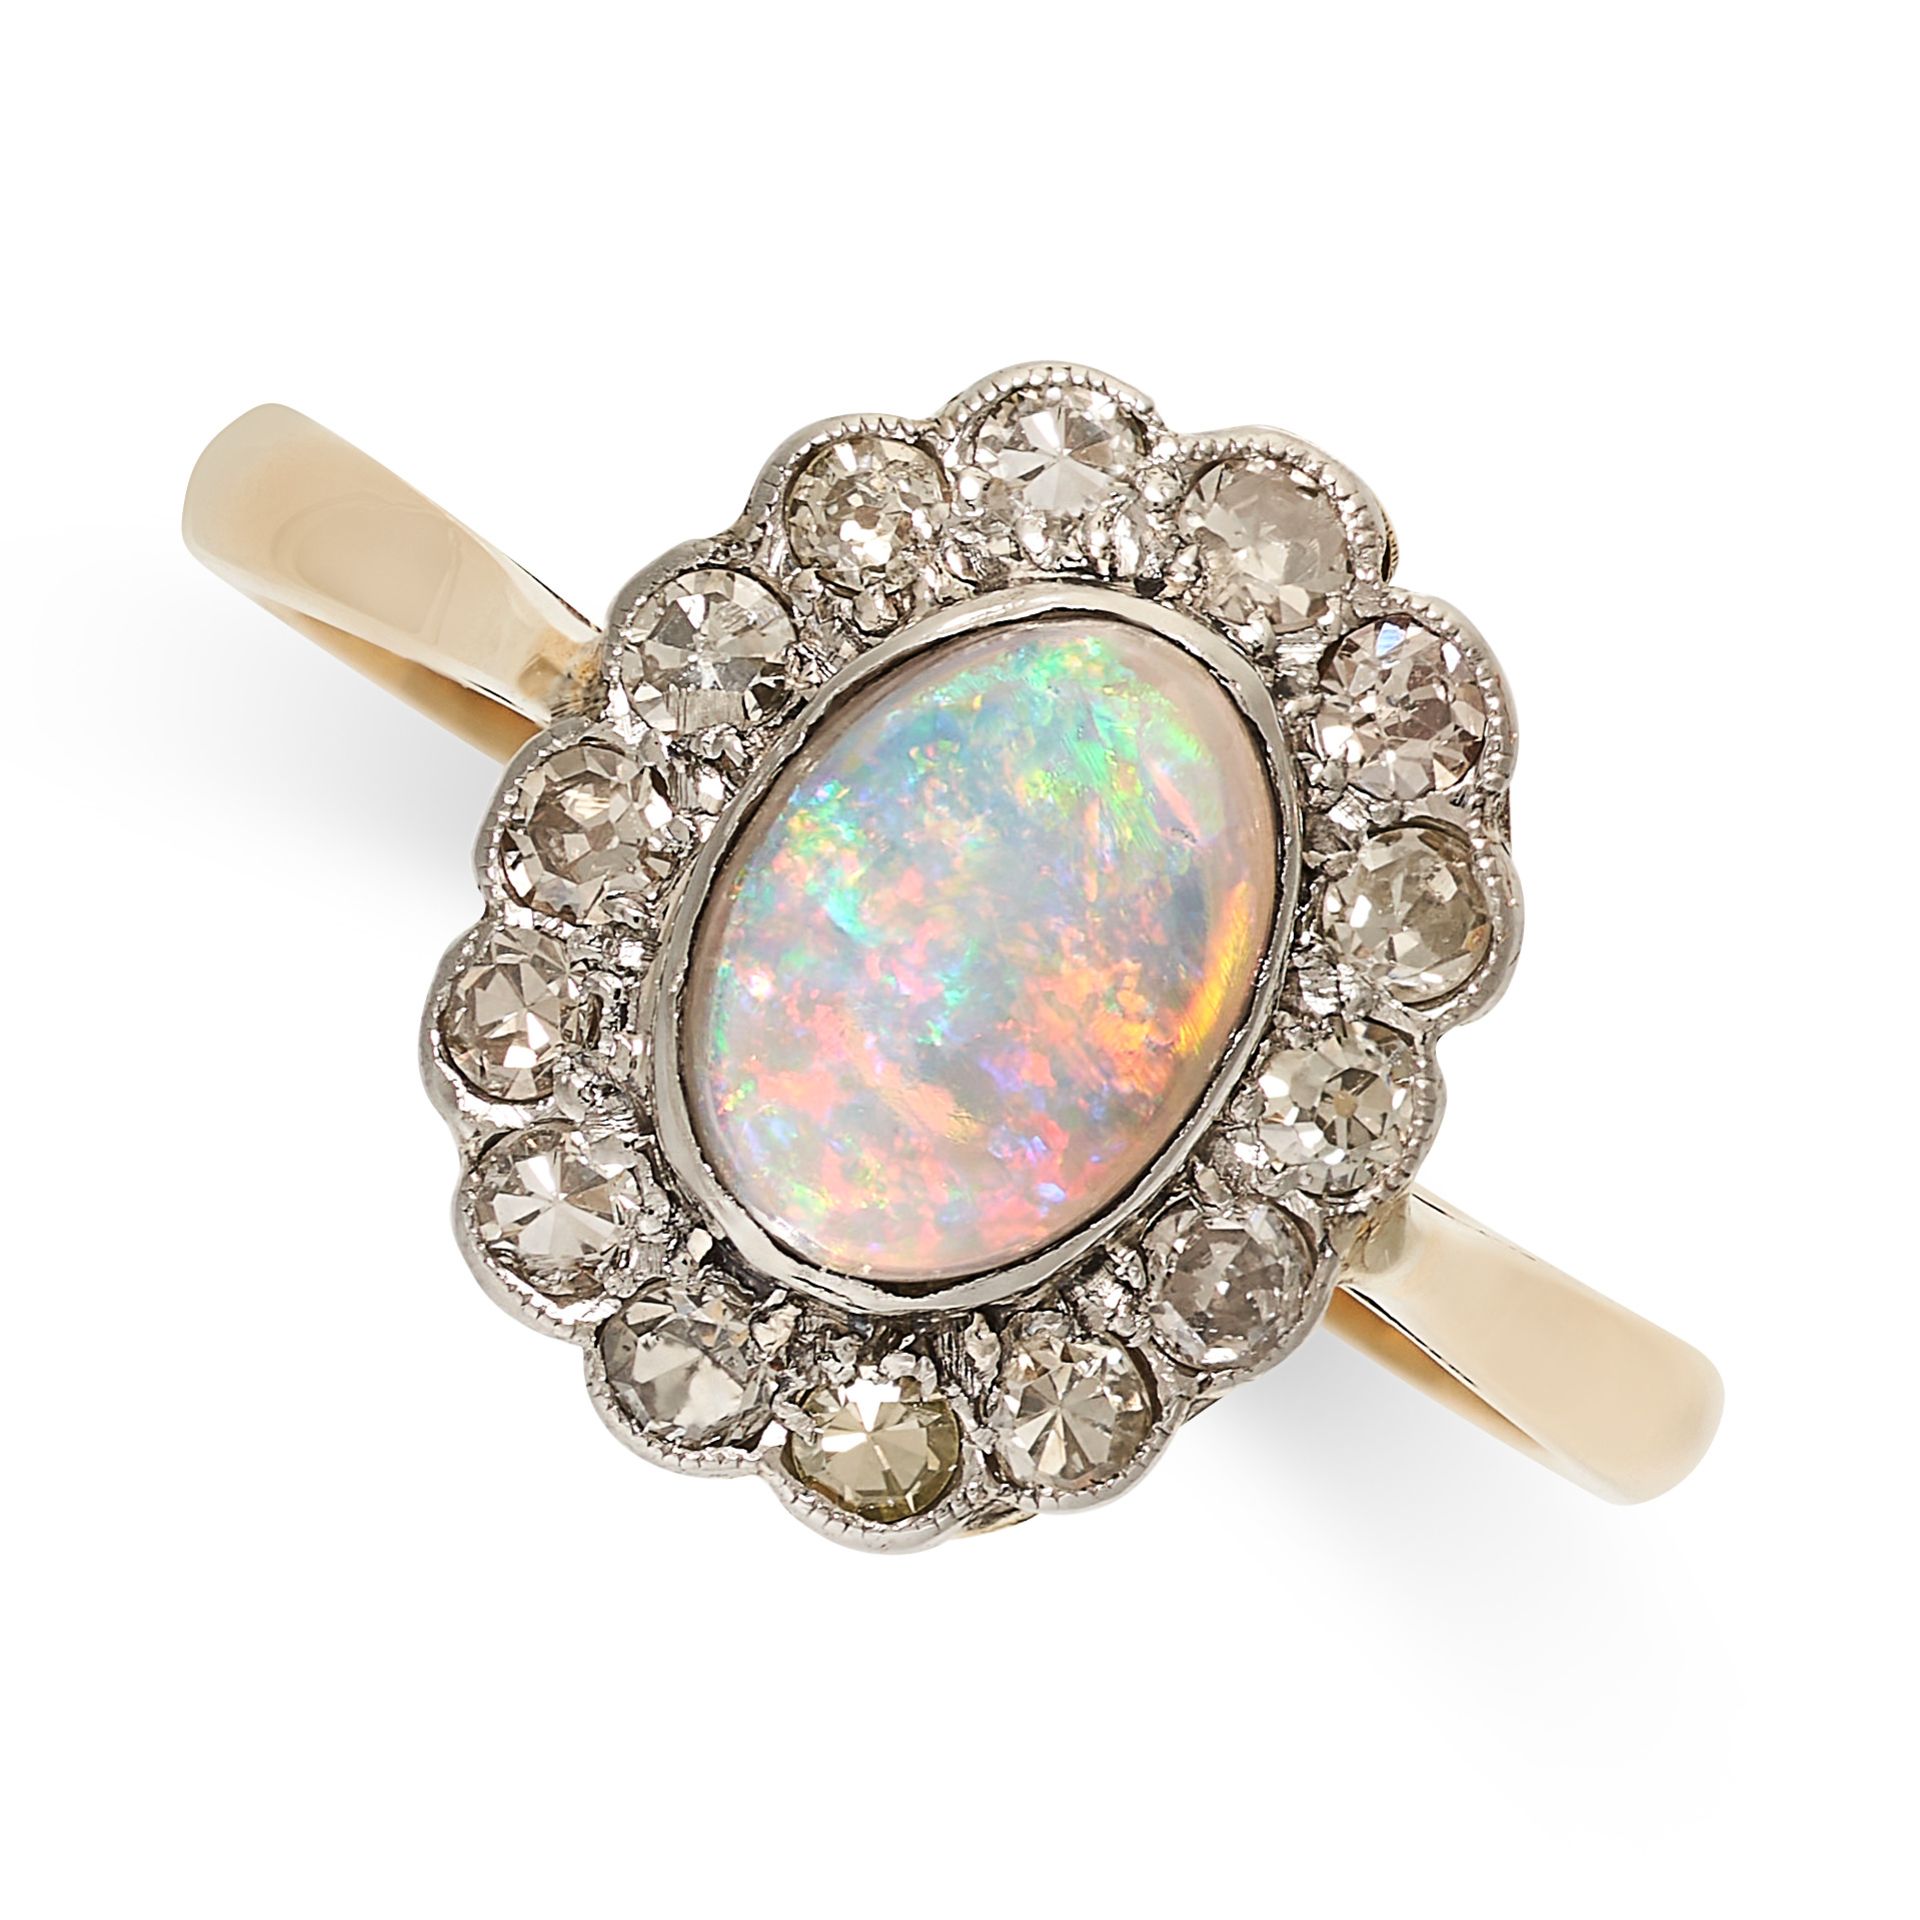 A VINTAGE OPAL AND DIAMOND CLUSTER RING in 18ct gold, set centrally with an opal cabochon of 0.64